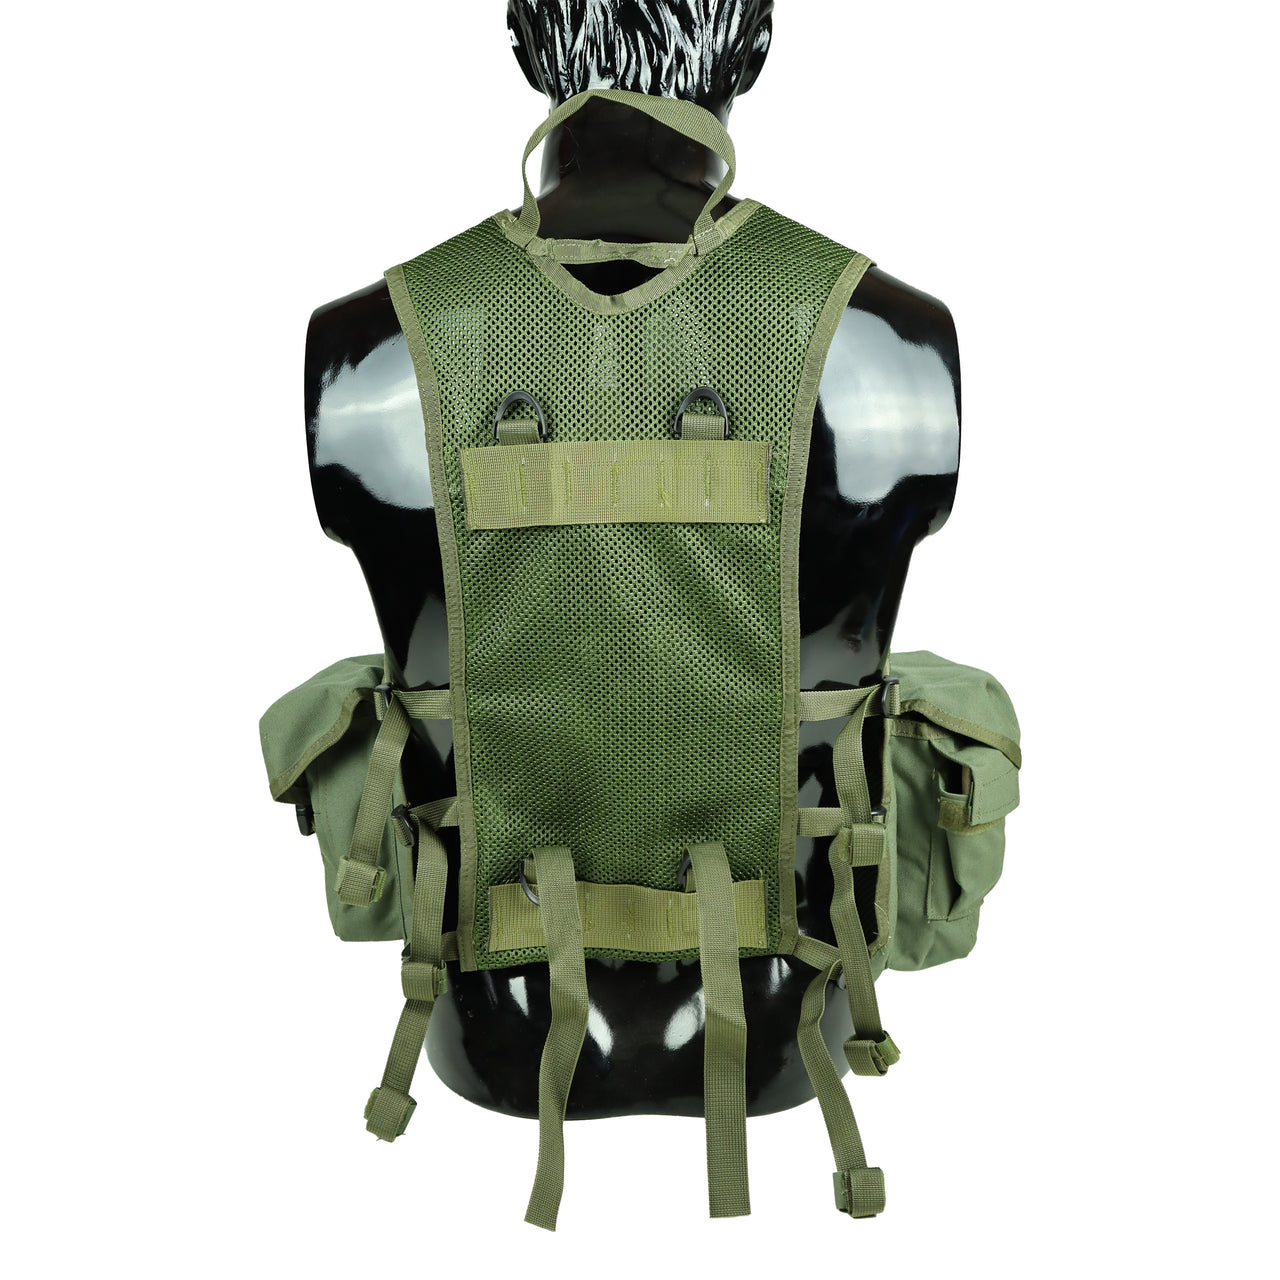 Tactical Vest With Ammunition Pouch - Olive Green